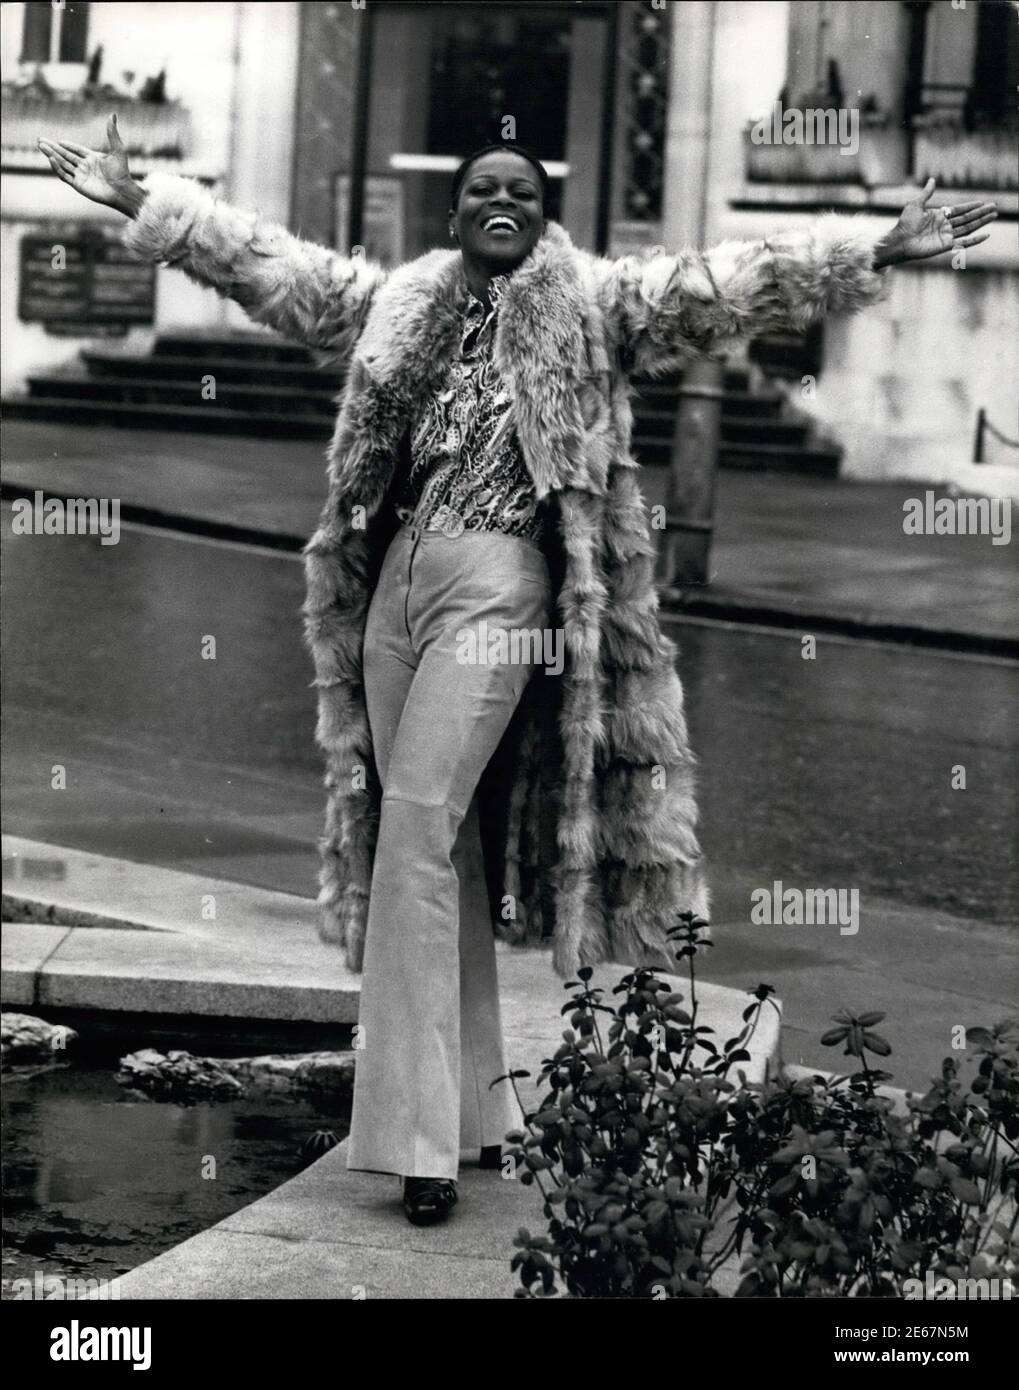 January 28, 2021: Cicely Tyson, an award-winning icon who broke barriers for Black actresses and who gained an Oscar nomination for her role as the sharecropper's wife in 'Sounder,' has died at 96. FILE PHOTO: Feb. 02, 1973, London, England,  United Kingdom: CICELY TYSON pictured during an outing in the West End today.Tyson, one of America's most distinguished actresses, who is hotly tipped to win this year's ''Best Actress' Academy Award, for her role in the 20th Century-Fox presentation ''Sounder'', has arrived in London.  (Credit Image: © Keystone Press Agency/Keystone USA via ZUMAPRESS.com Stock Photo